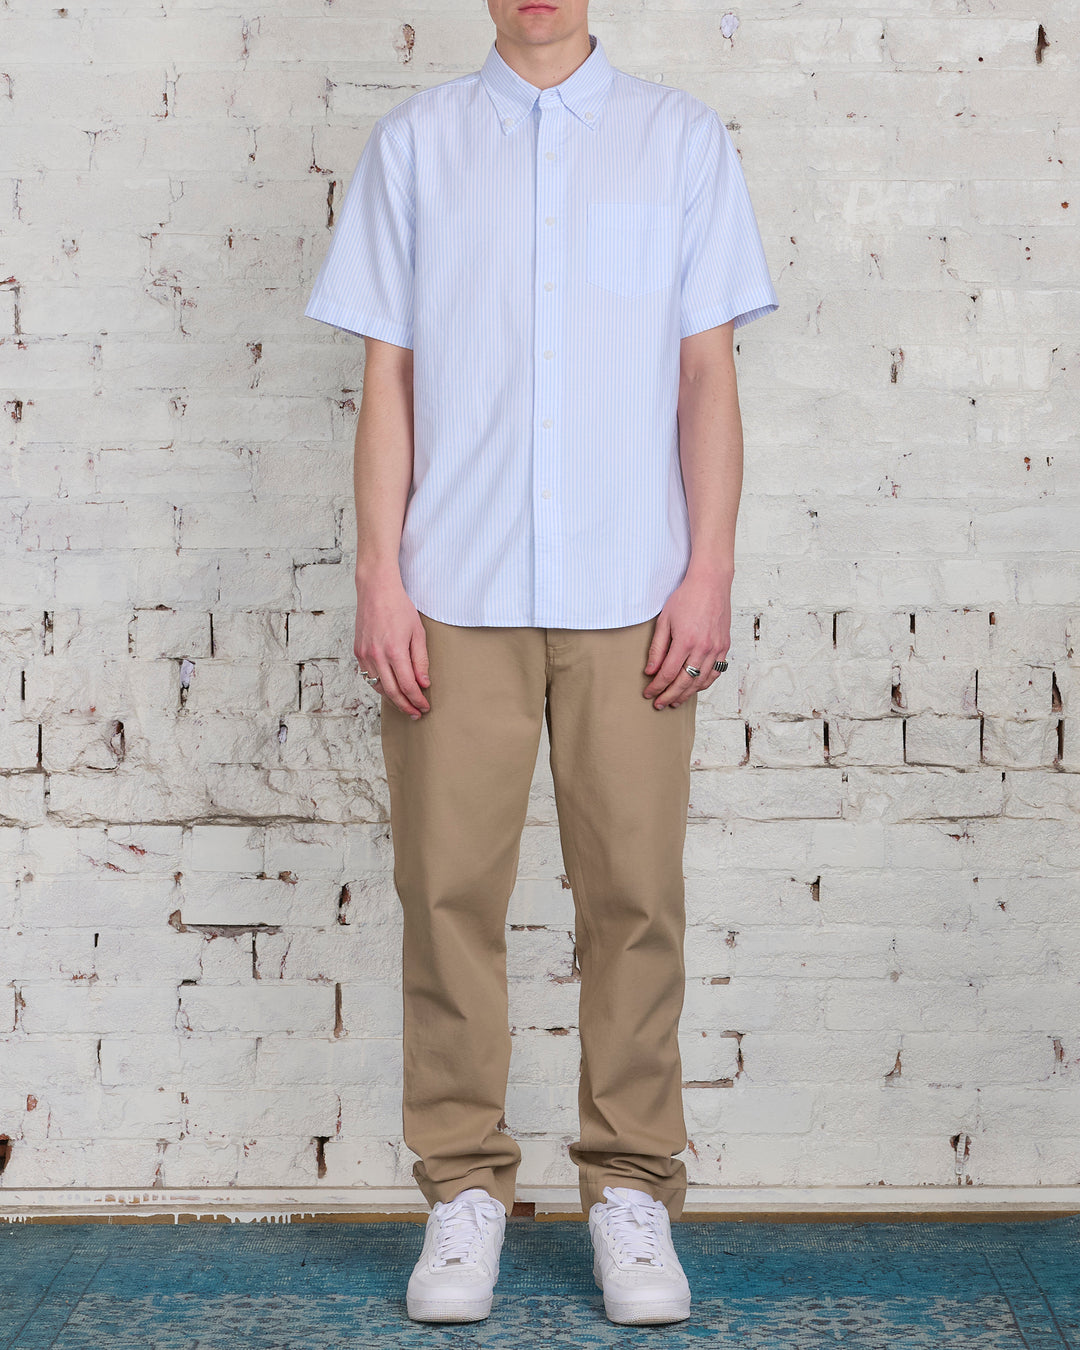 Reigning Champ Windsor Short Sleeve Oxford Button Shirt White Blue